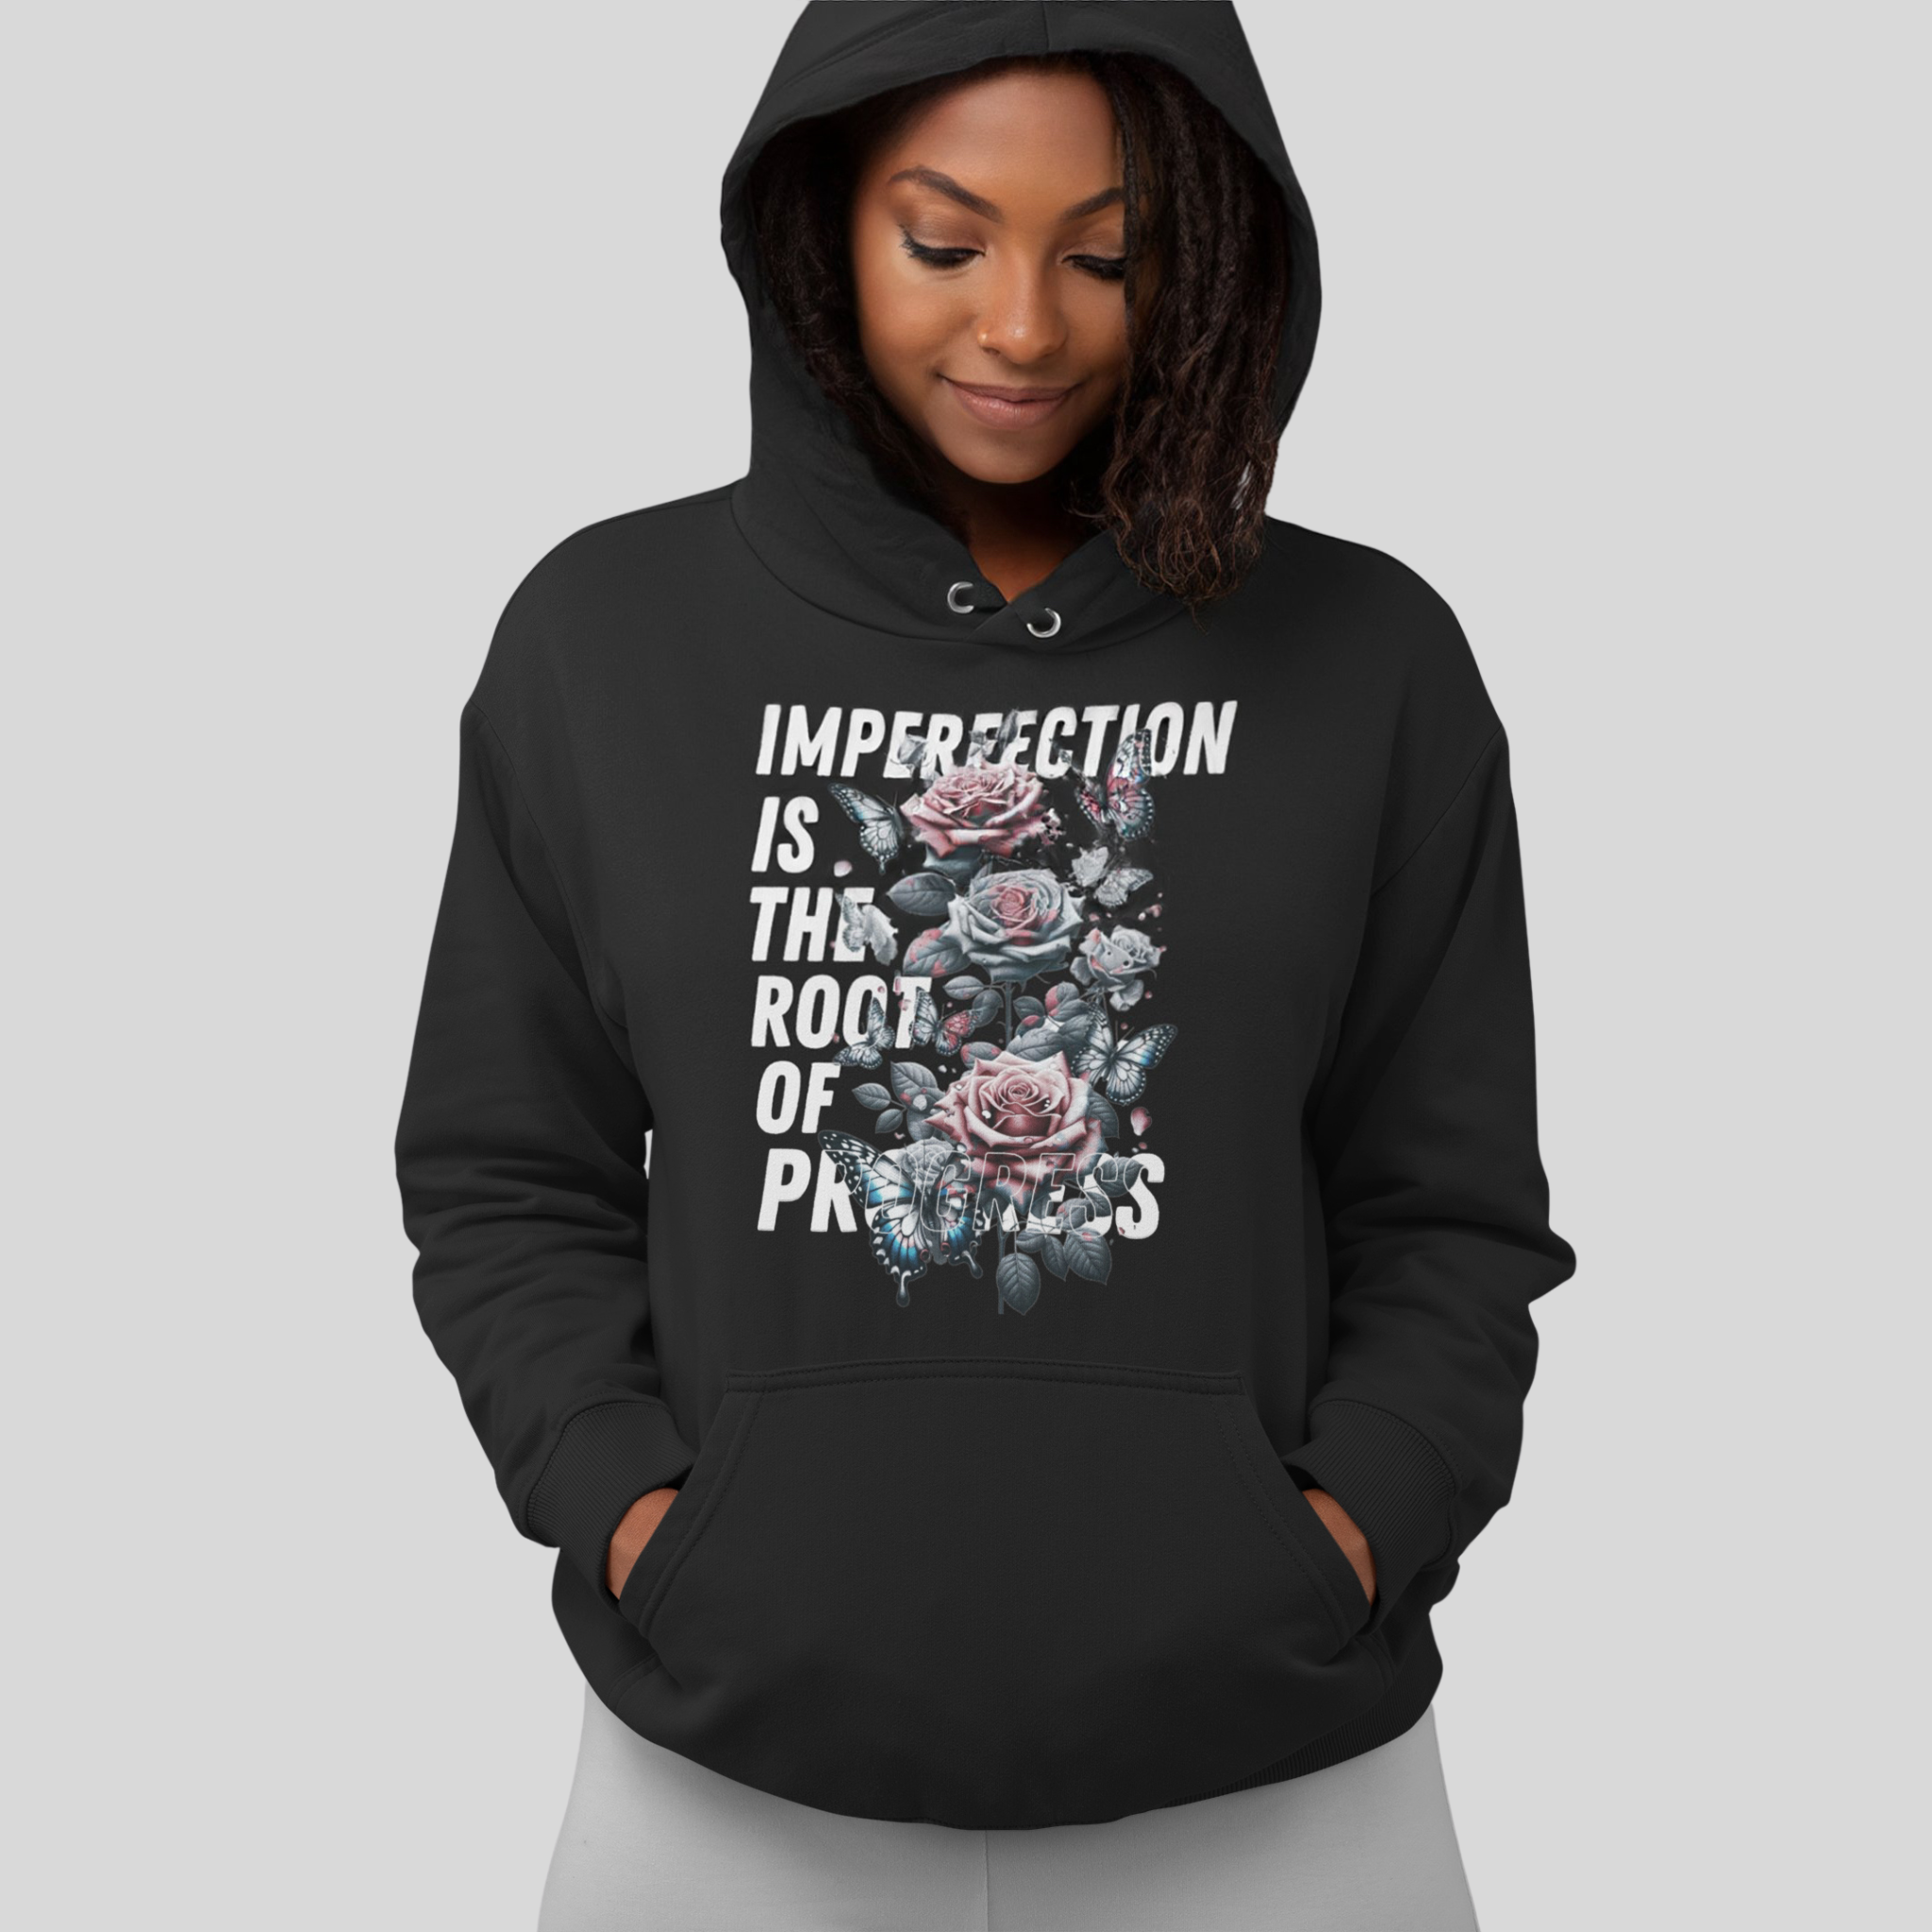 Image of a black hoodie with the inspiring message 'Imperfection is the root of growth' printed in white on the front. Accompanying the text is a beautifully detailed floral graphic, adding a touch of elegance and nature to the design. The hoodie is made from a comfortable blend of 80% cotton and 20% polyester, ensuring both durability and softness. This design elegantly combines a powerful message with artistic flair, making it both meaningful and stylish. black imperfectly qualified hoodie.